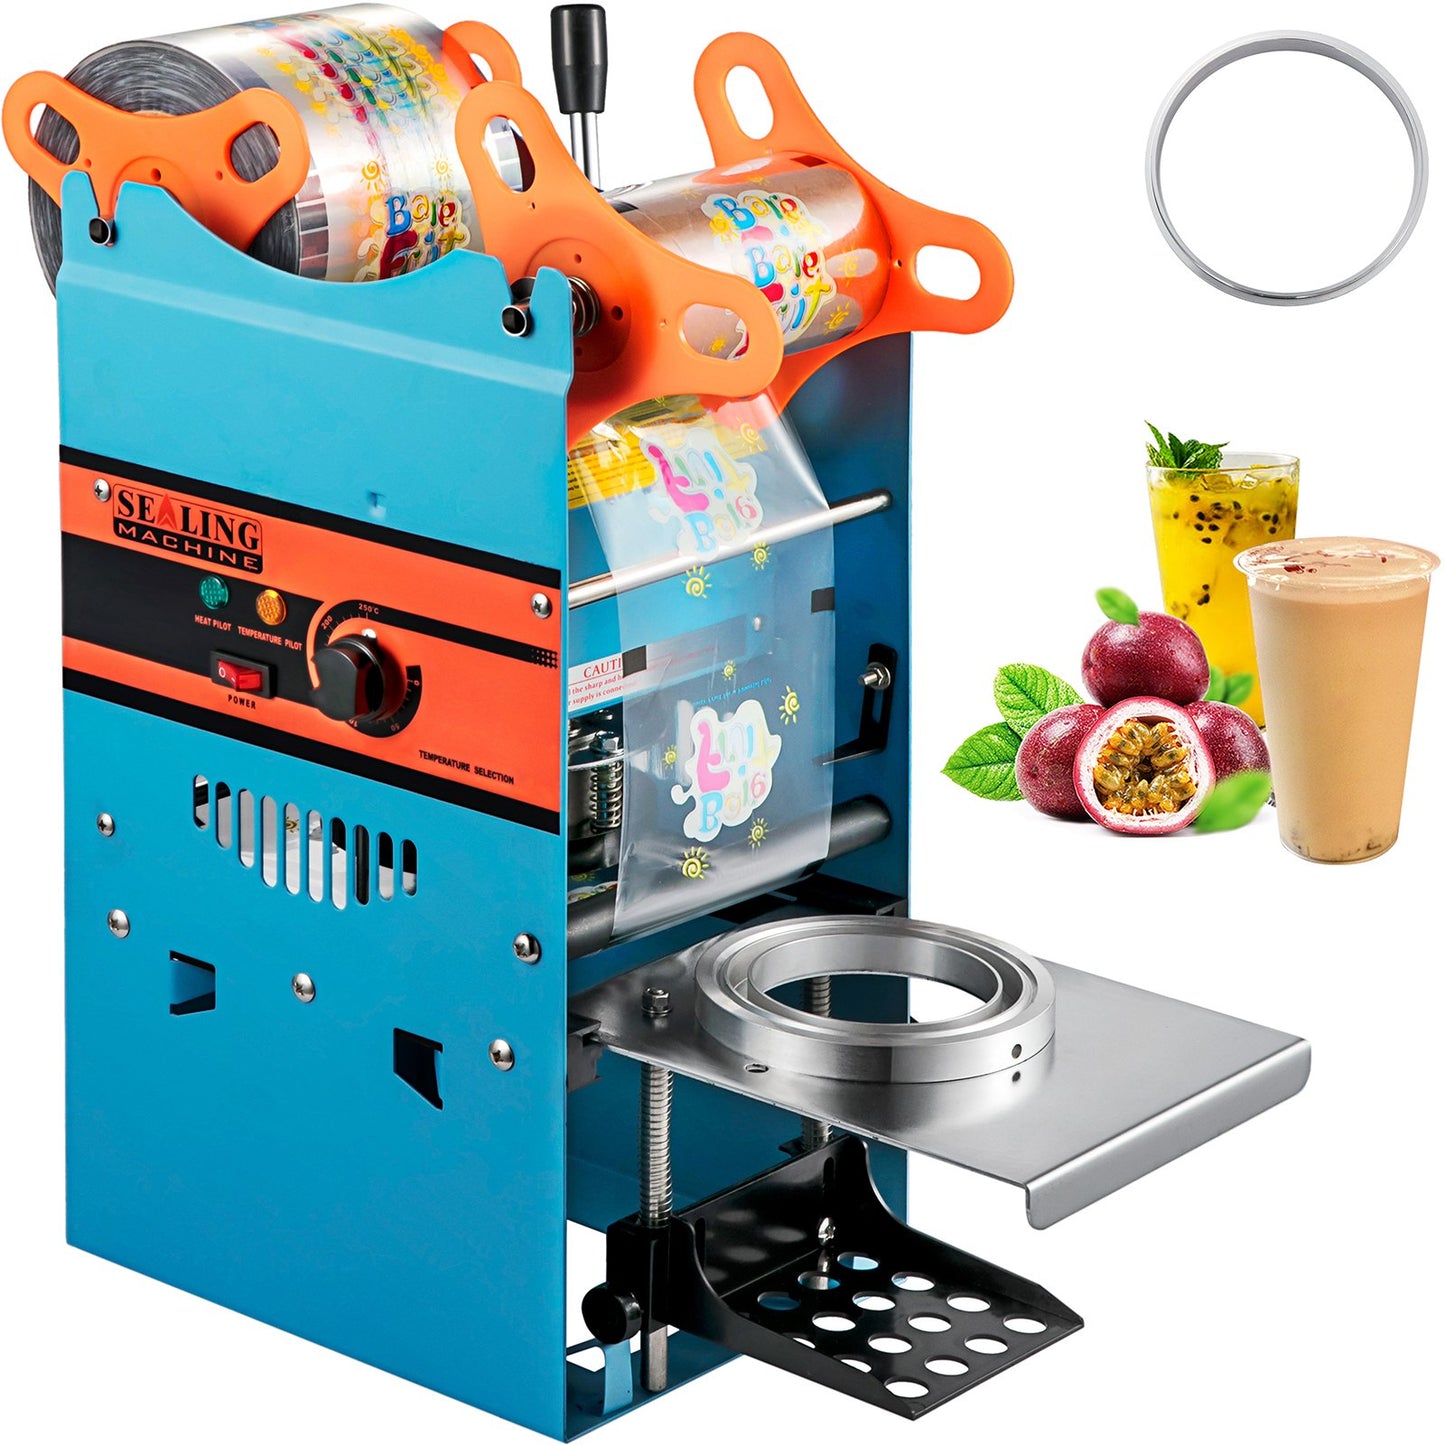 Manual sealing machine for hot or cold drinks - bubble tea sealer